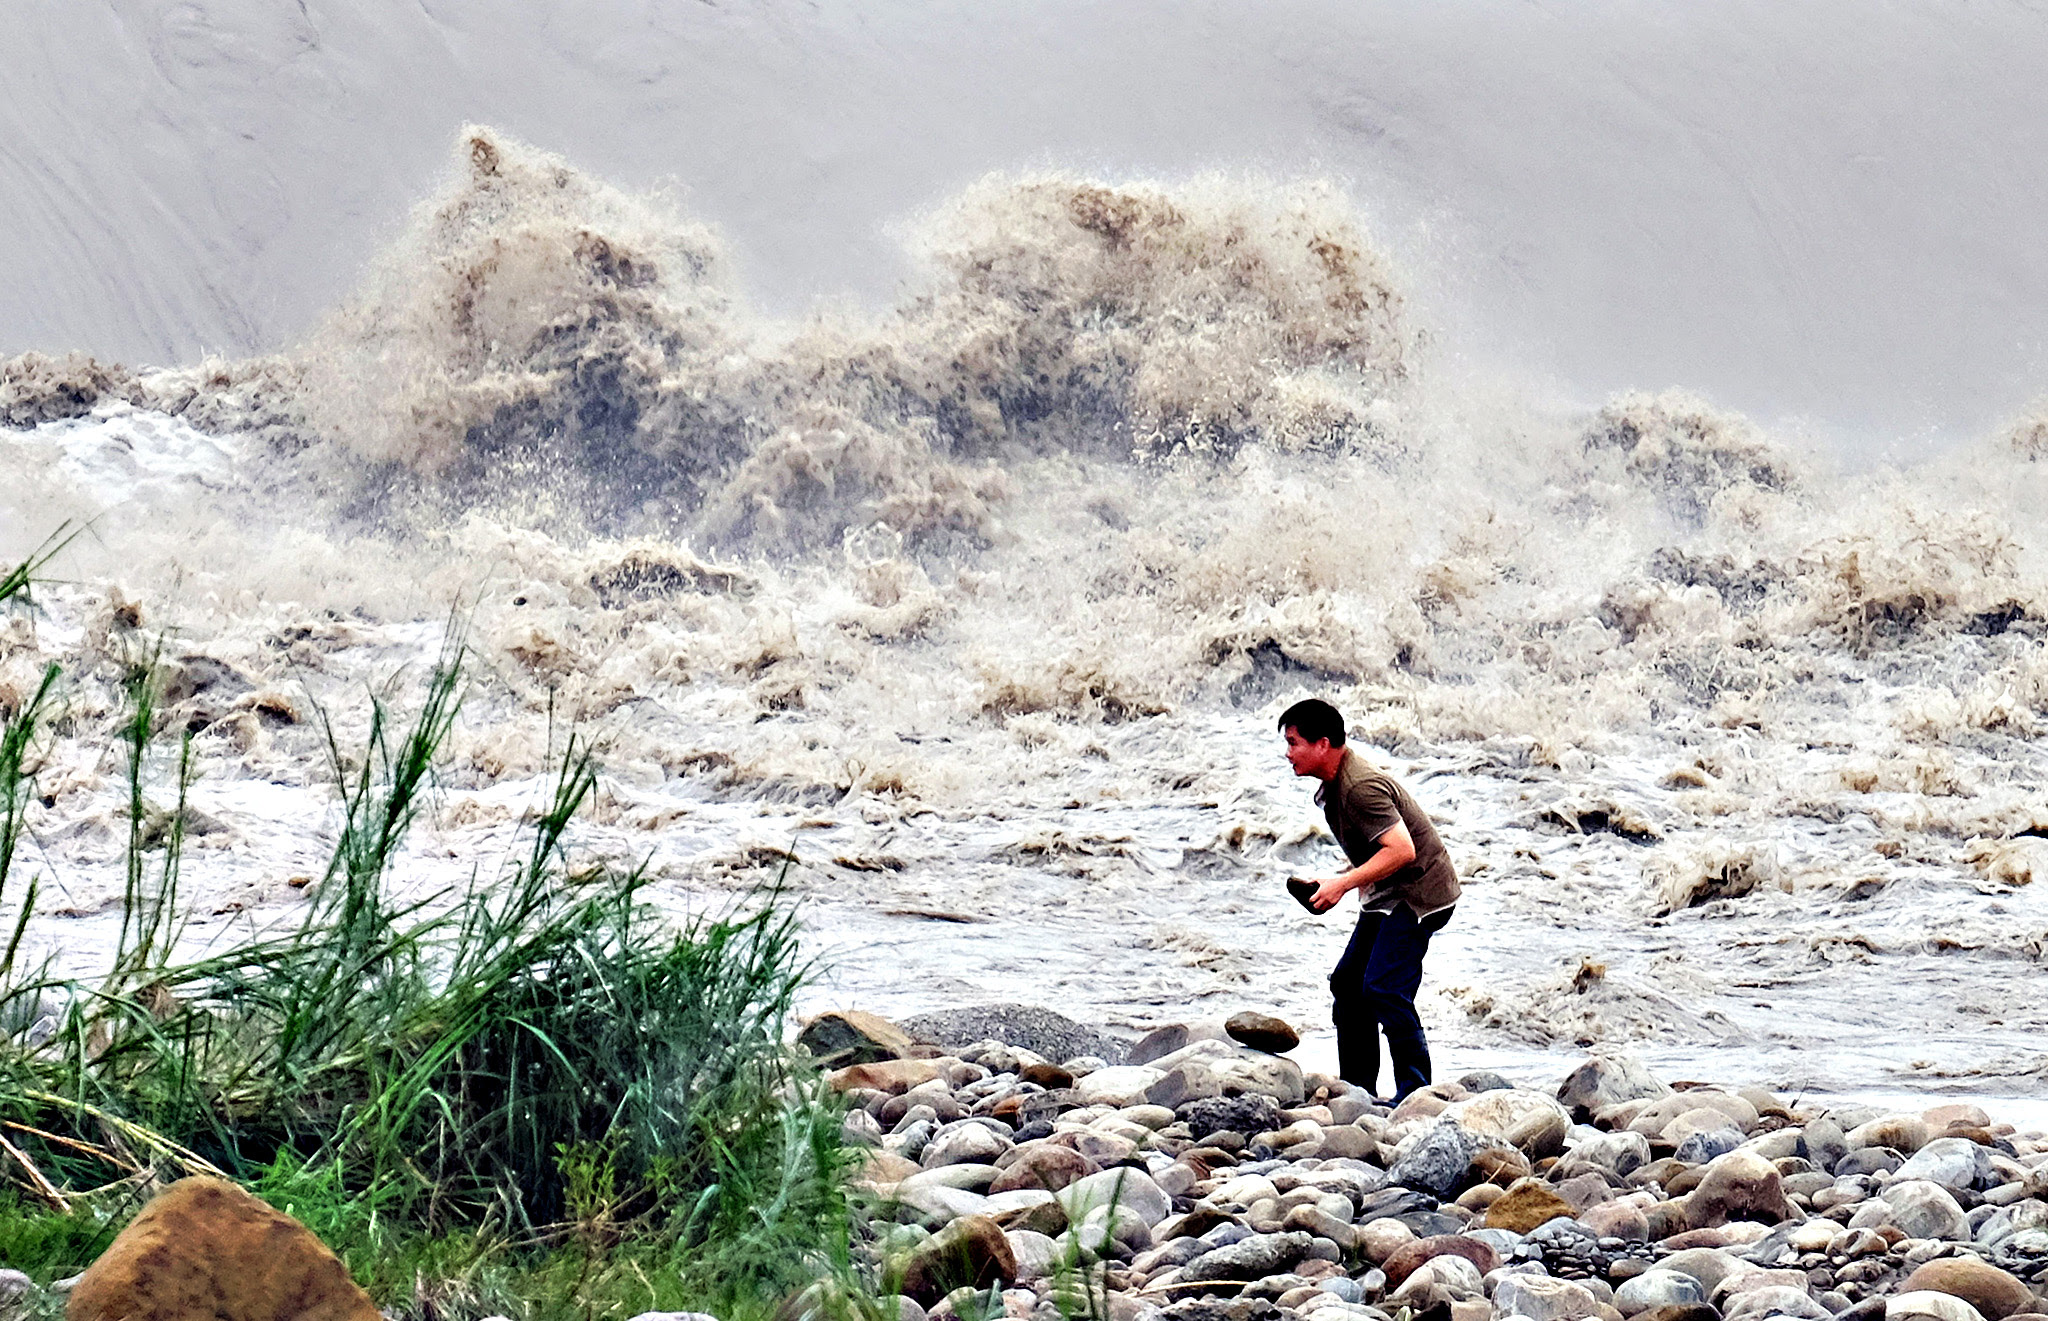 A local resident collects stones from the Xindian river after Typhoon Dujuan passed in the New Taipei City on September 29, 2015. Super typhoon Dujuan killed two and left more than 300 injured in Taiwan before making landfall in China.